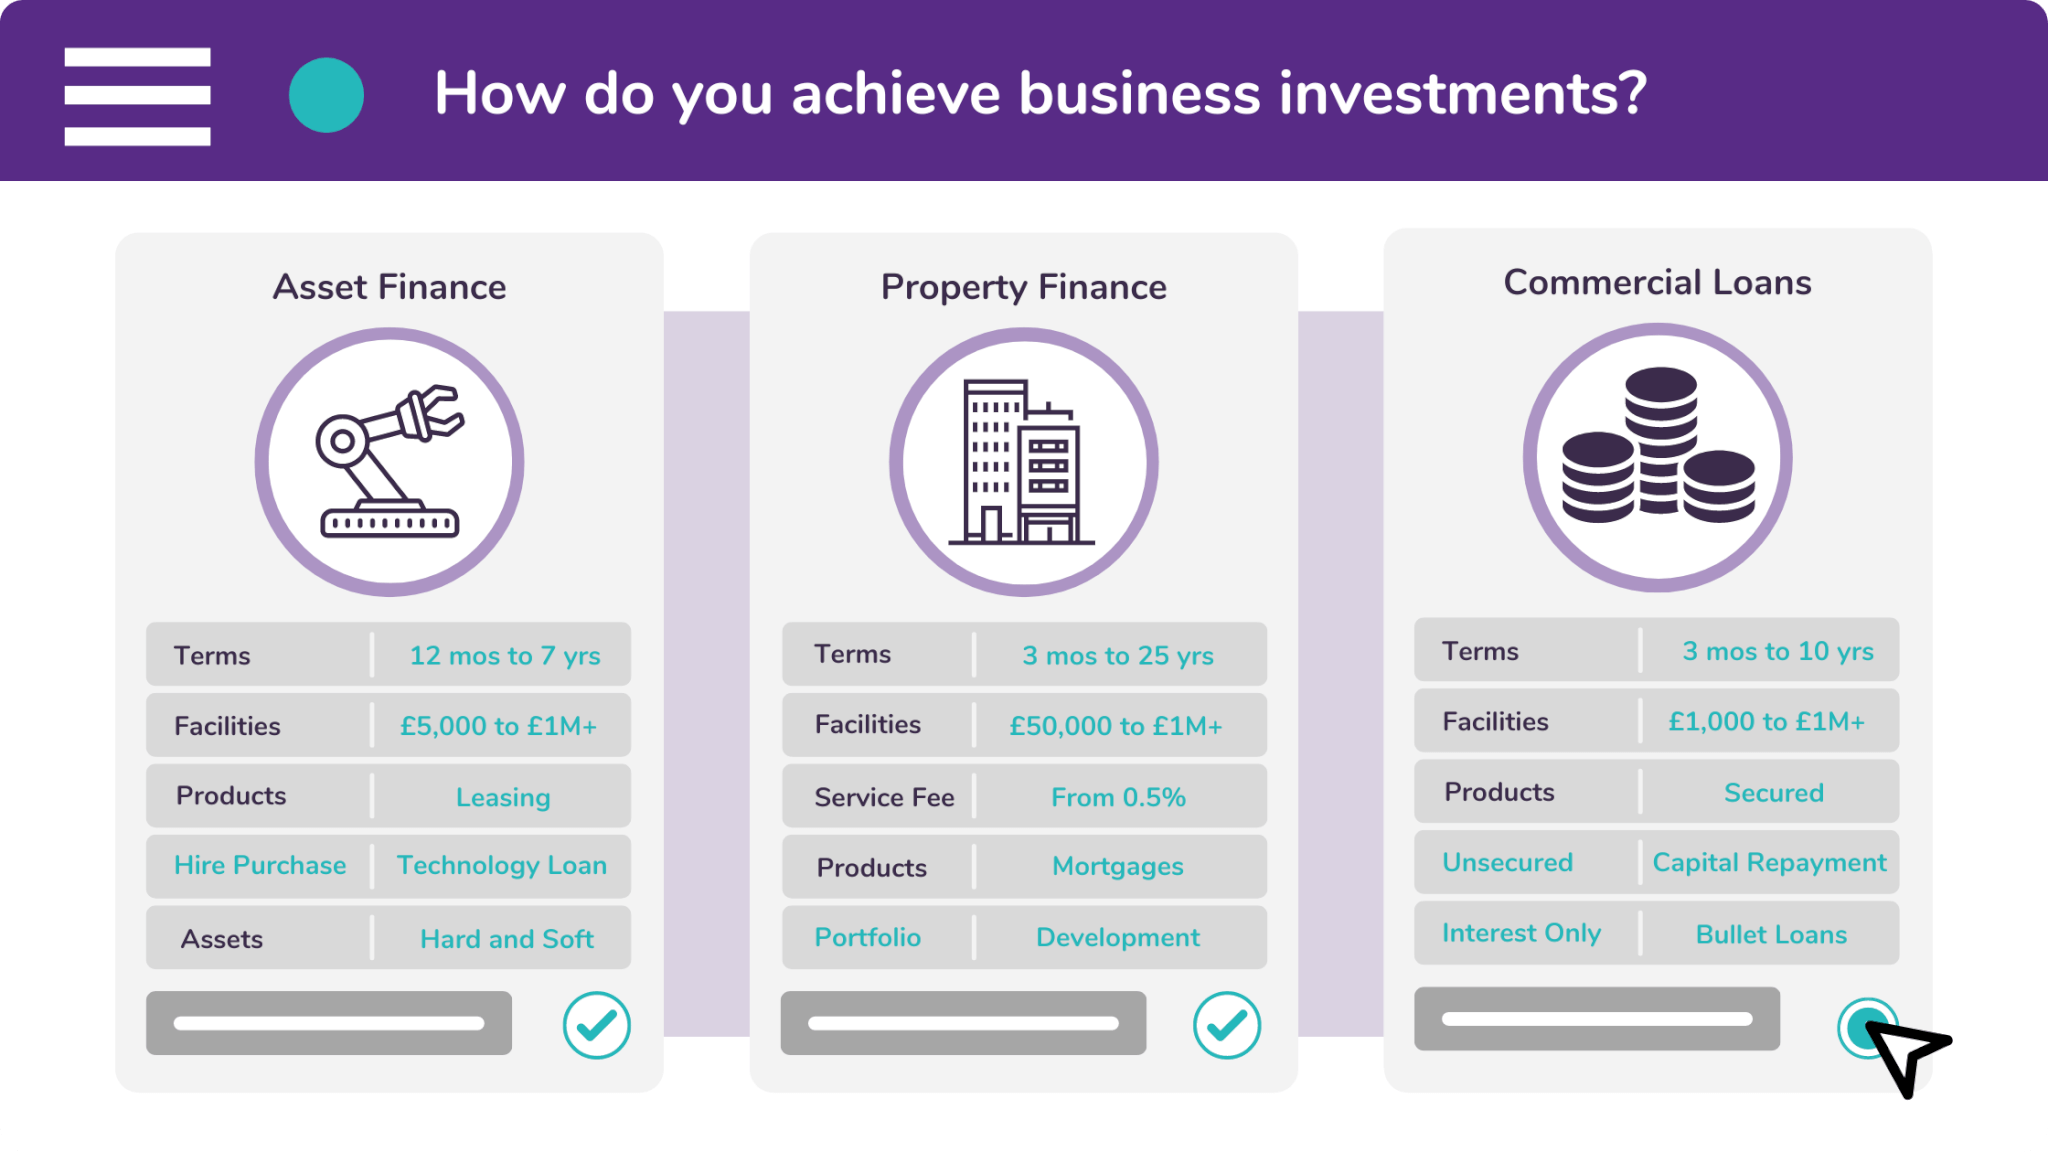 You can achieve business investment through three types of finance: property finance, asset finance, and commercial loans.